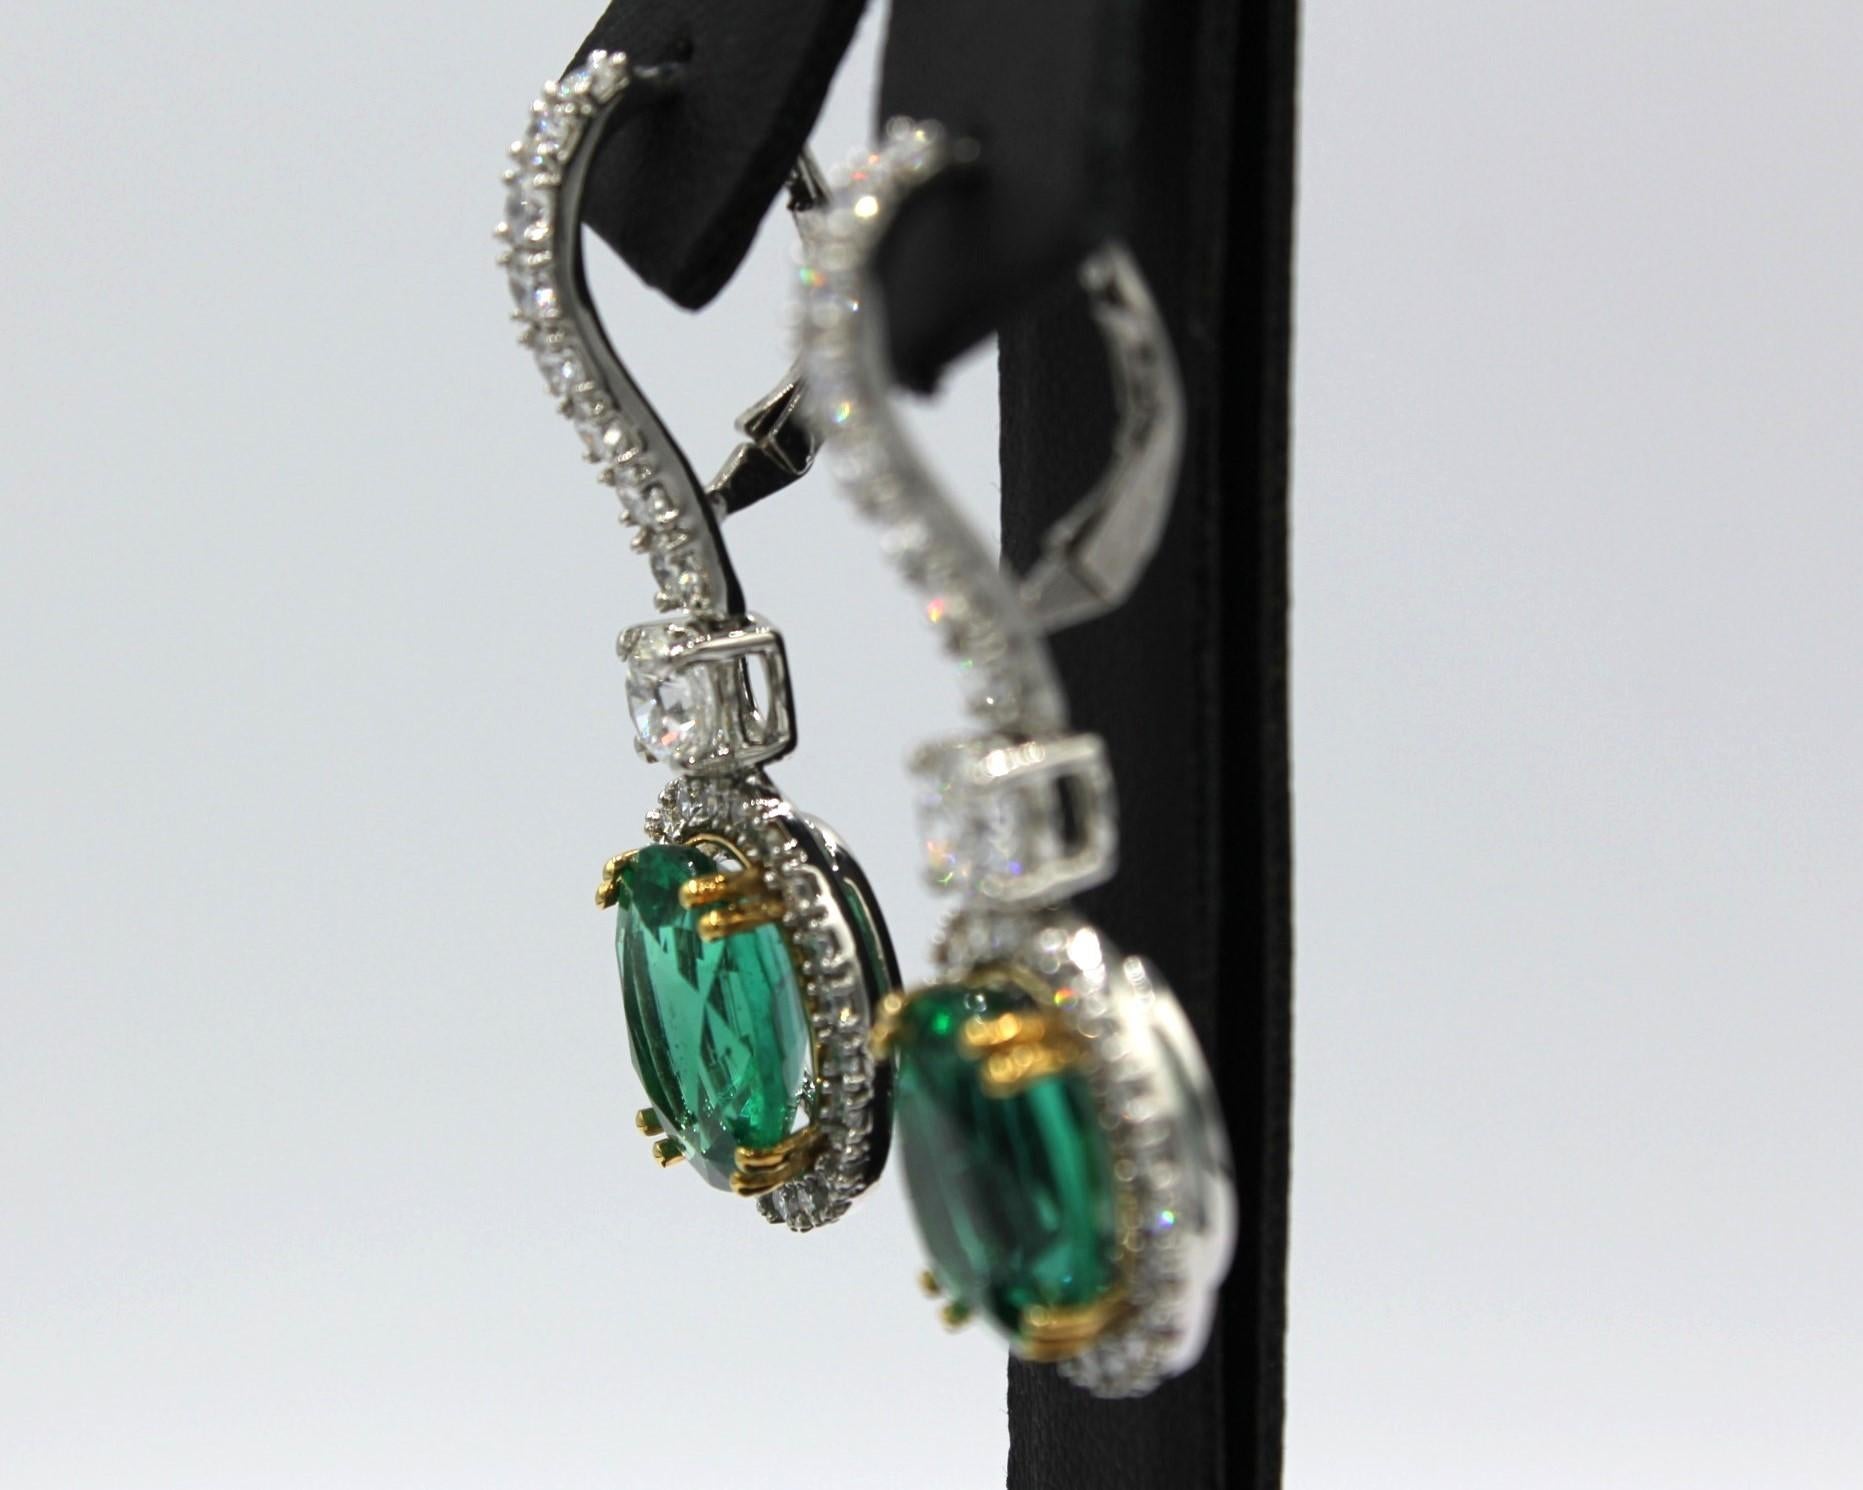 8.44 carats Paired Oval shaped Zambian Emeralds with sixty-two round Diamonds totaling the weight of 2.83 carats. 

This Emerald Diamond Earring will highlight your elegance and uniqueness. 

Item Details:
- Type: Earring
- Metal: 18K Platinum and